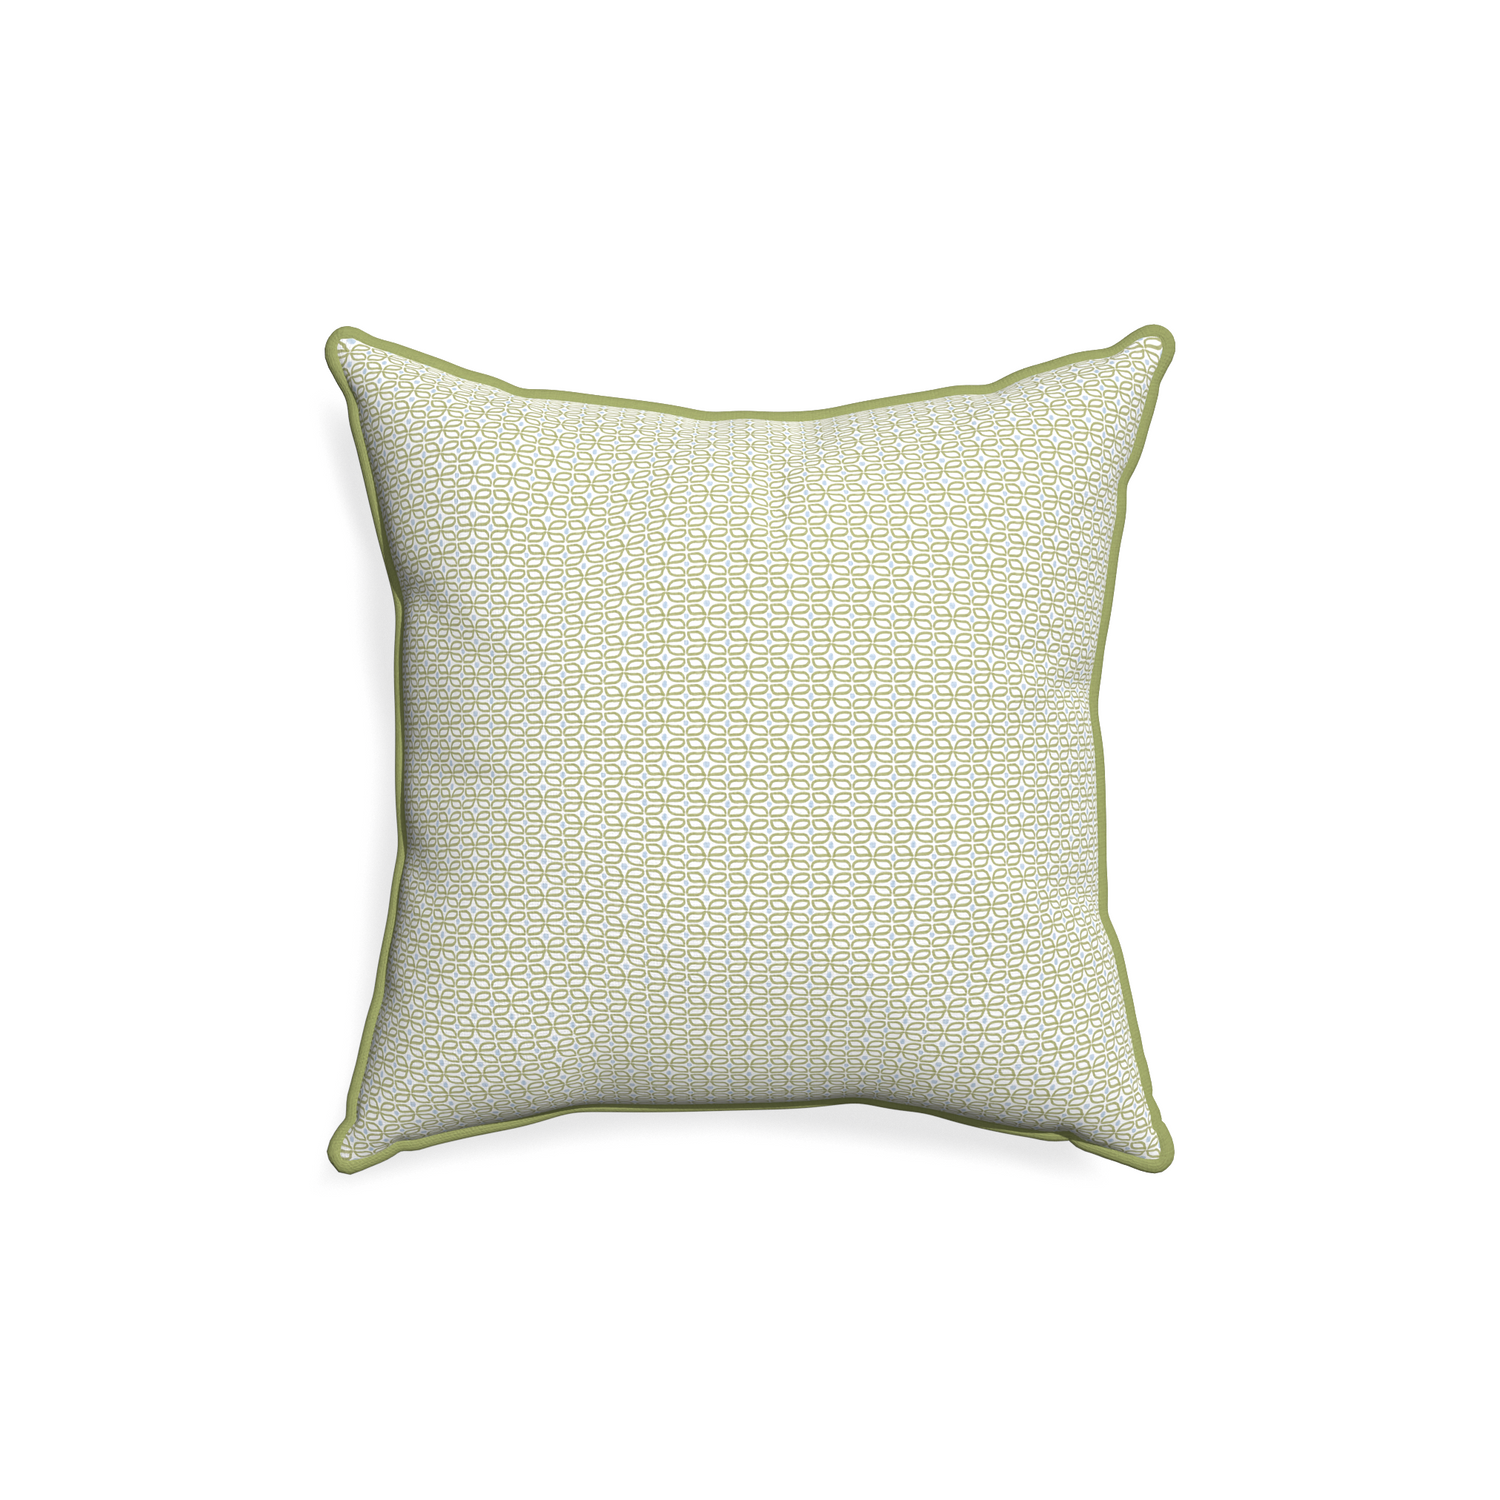 18-square loomi moss custom moss green geometricpillow with moss piping on white background